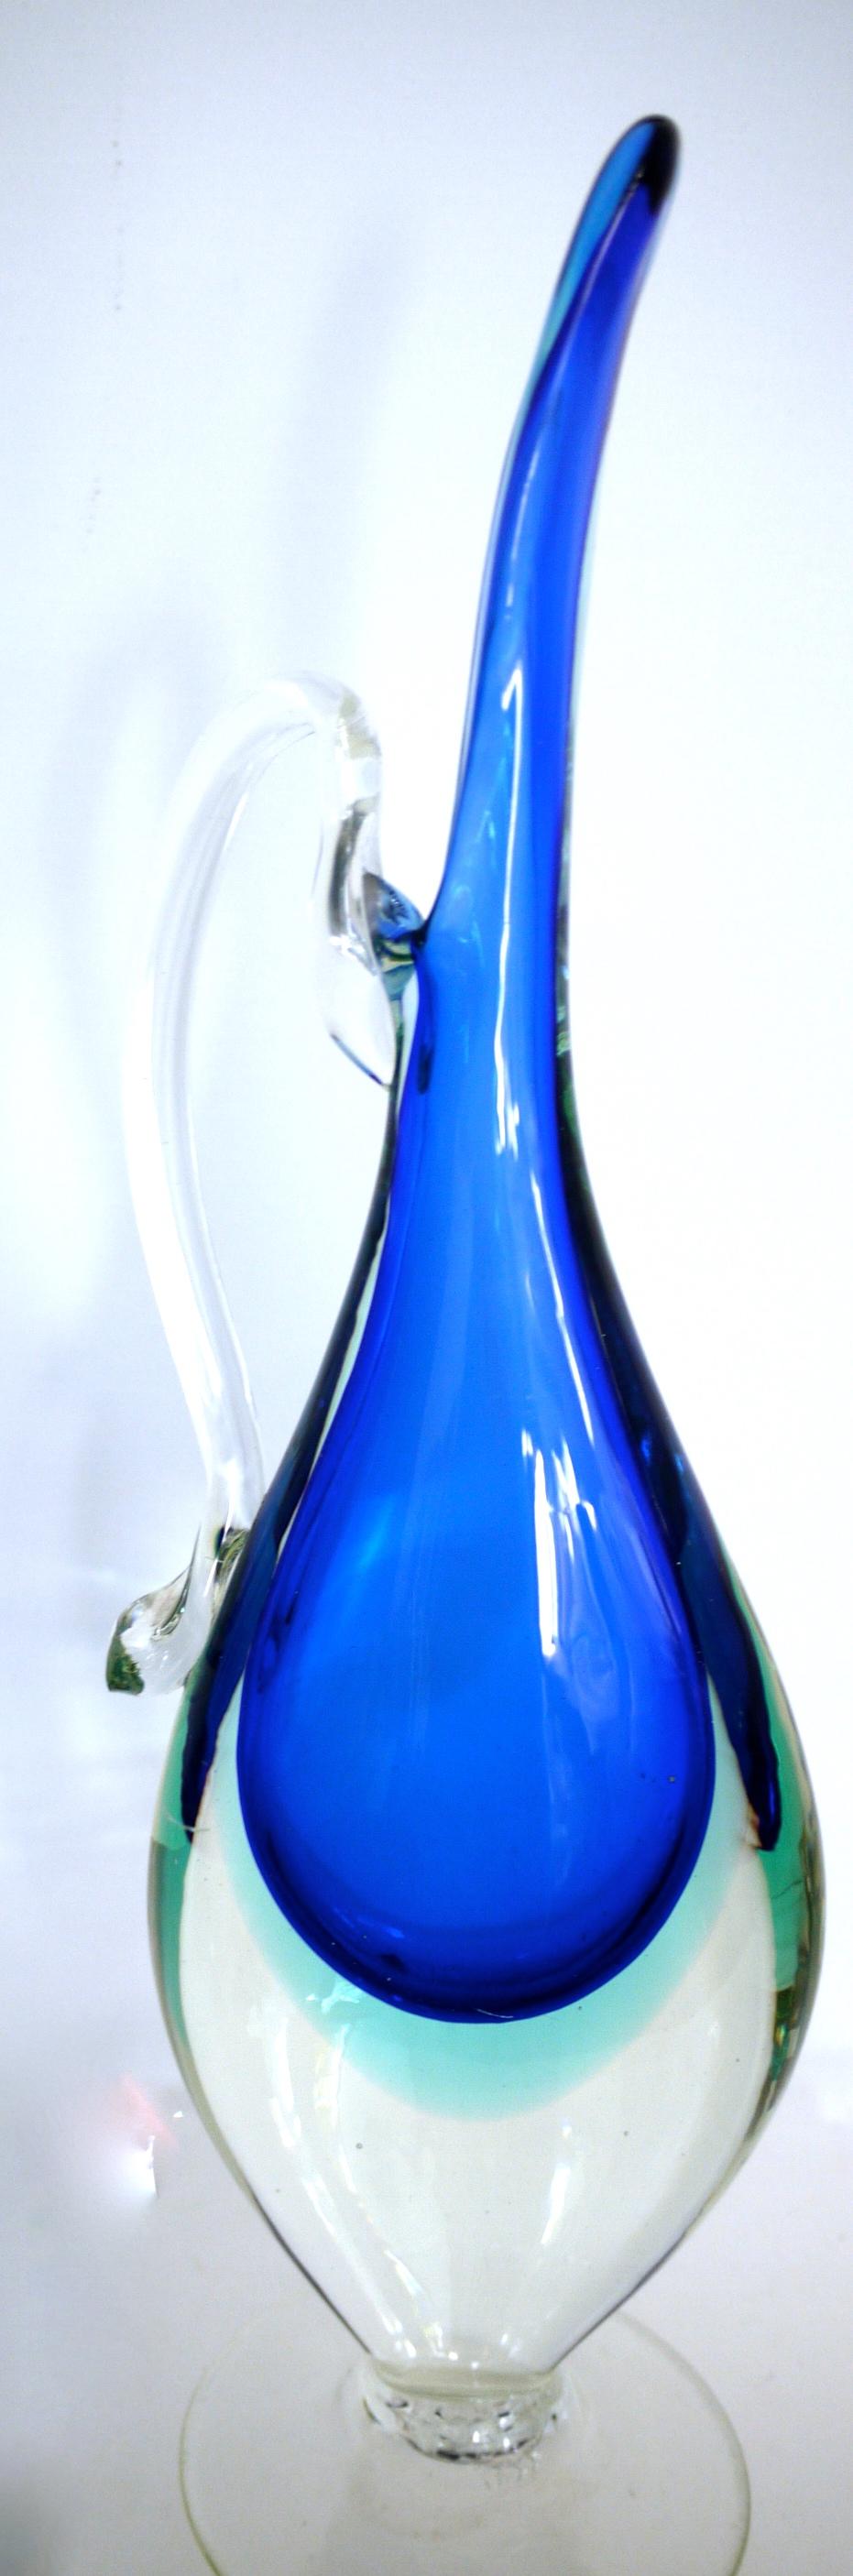 Pair of Murano Sommerso Glass Vases/Pitchers in Layered Shades of Blue, 1980s For Sale 2